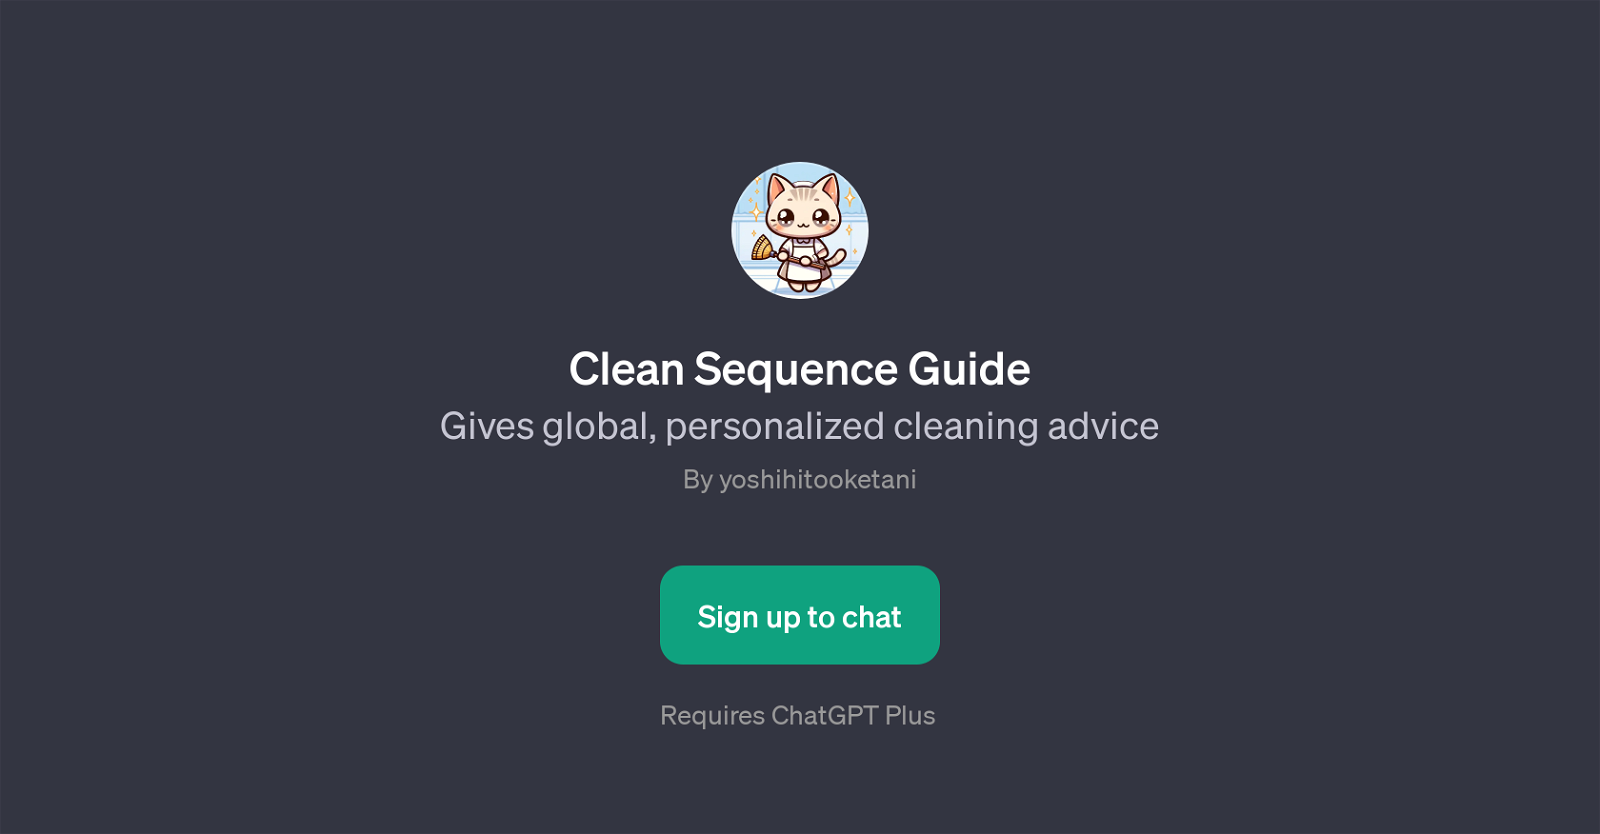 Clean Sequence Guide website